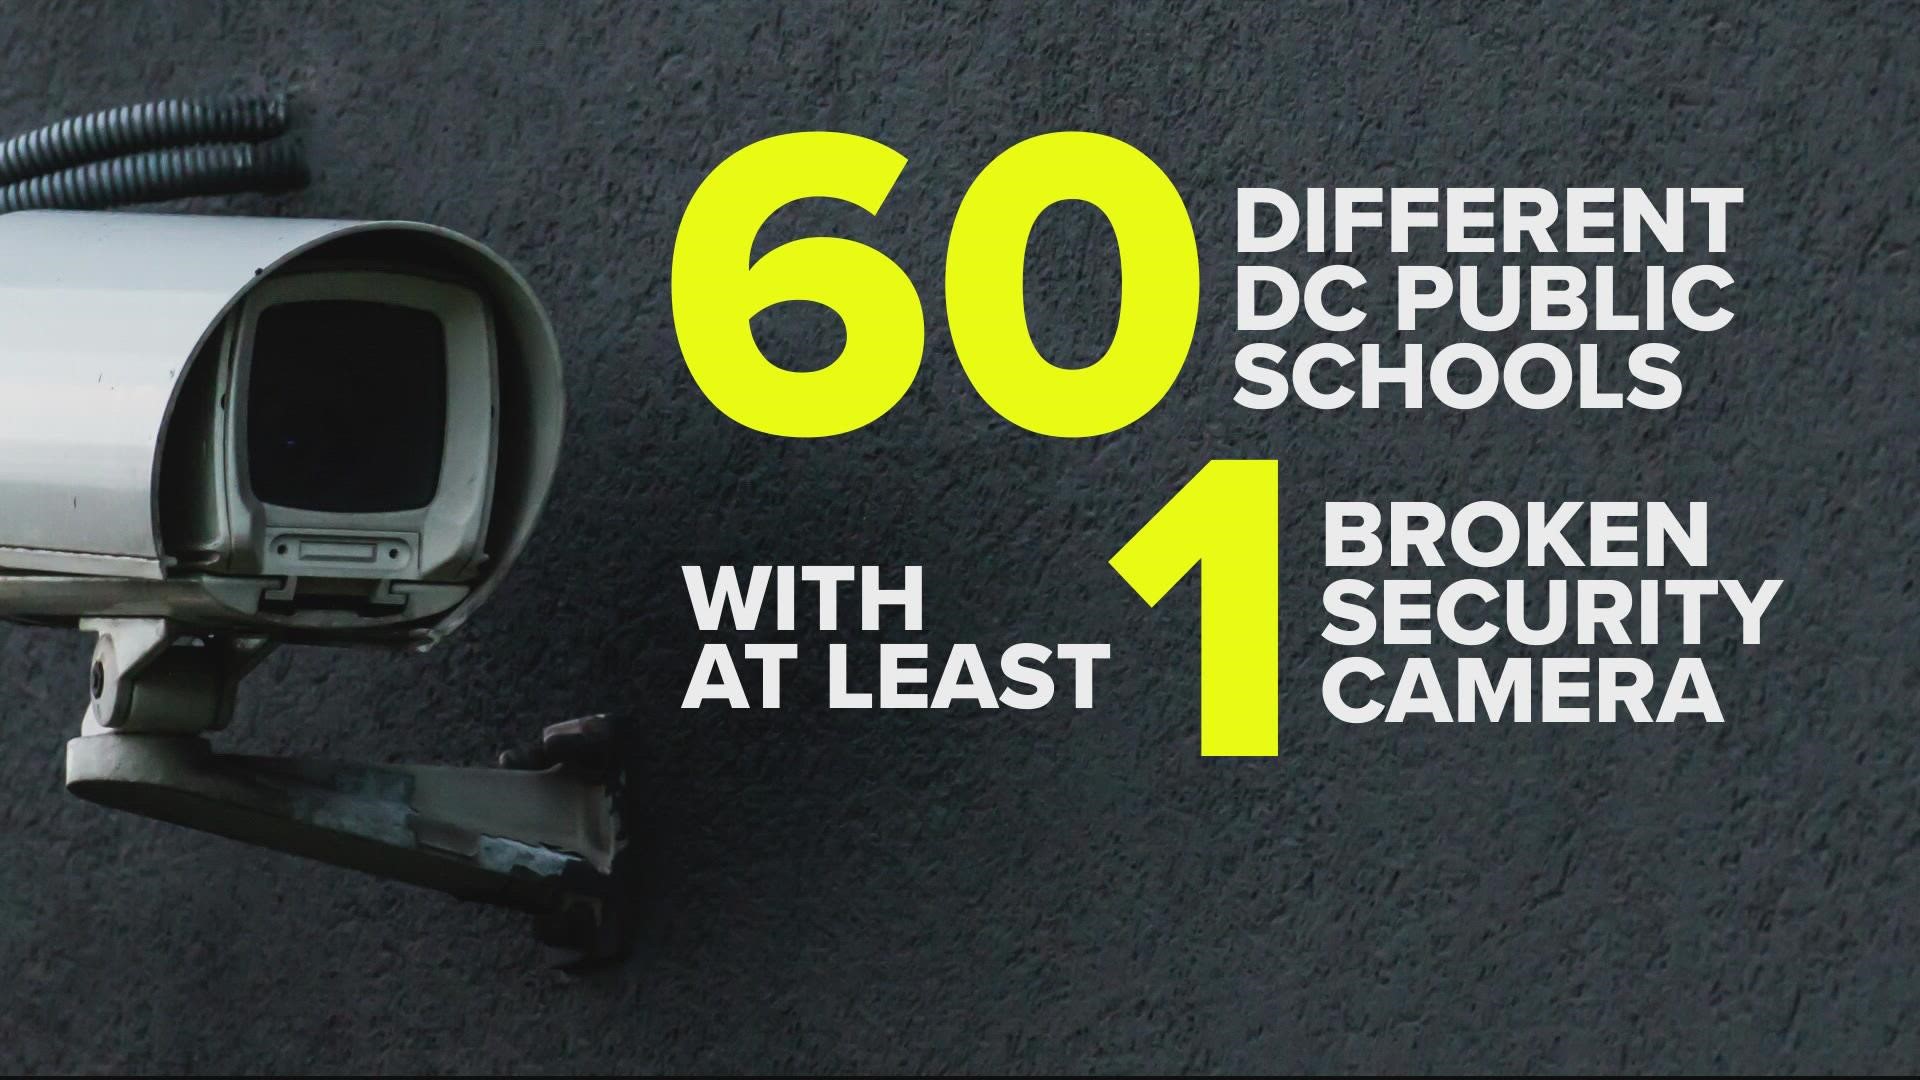 Records obtained by our investigative team...reveal more than 300 broken security cameras in elementary, middle and high schools across the District